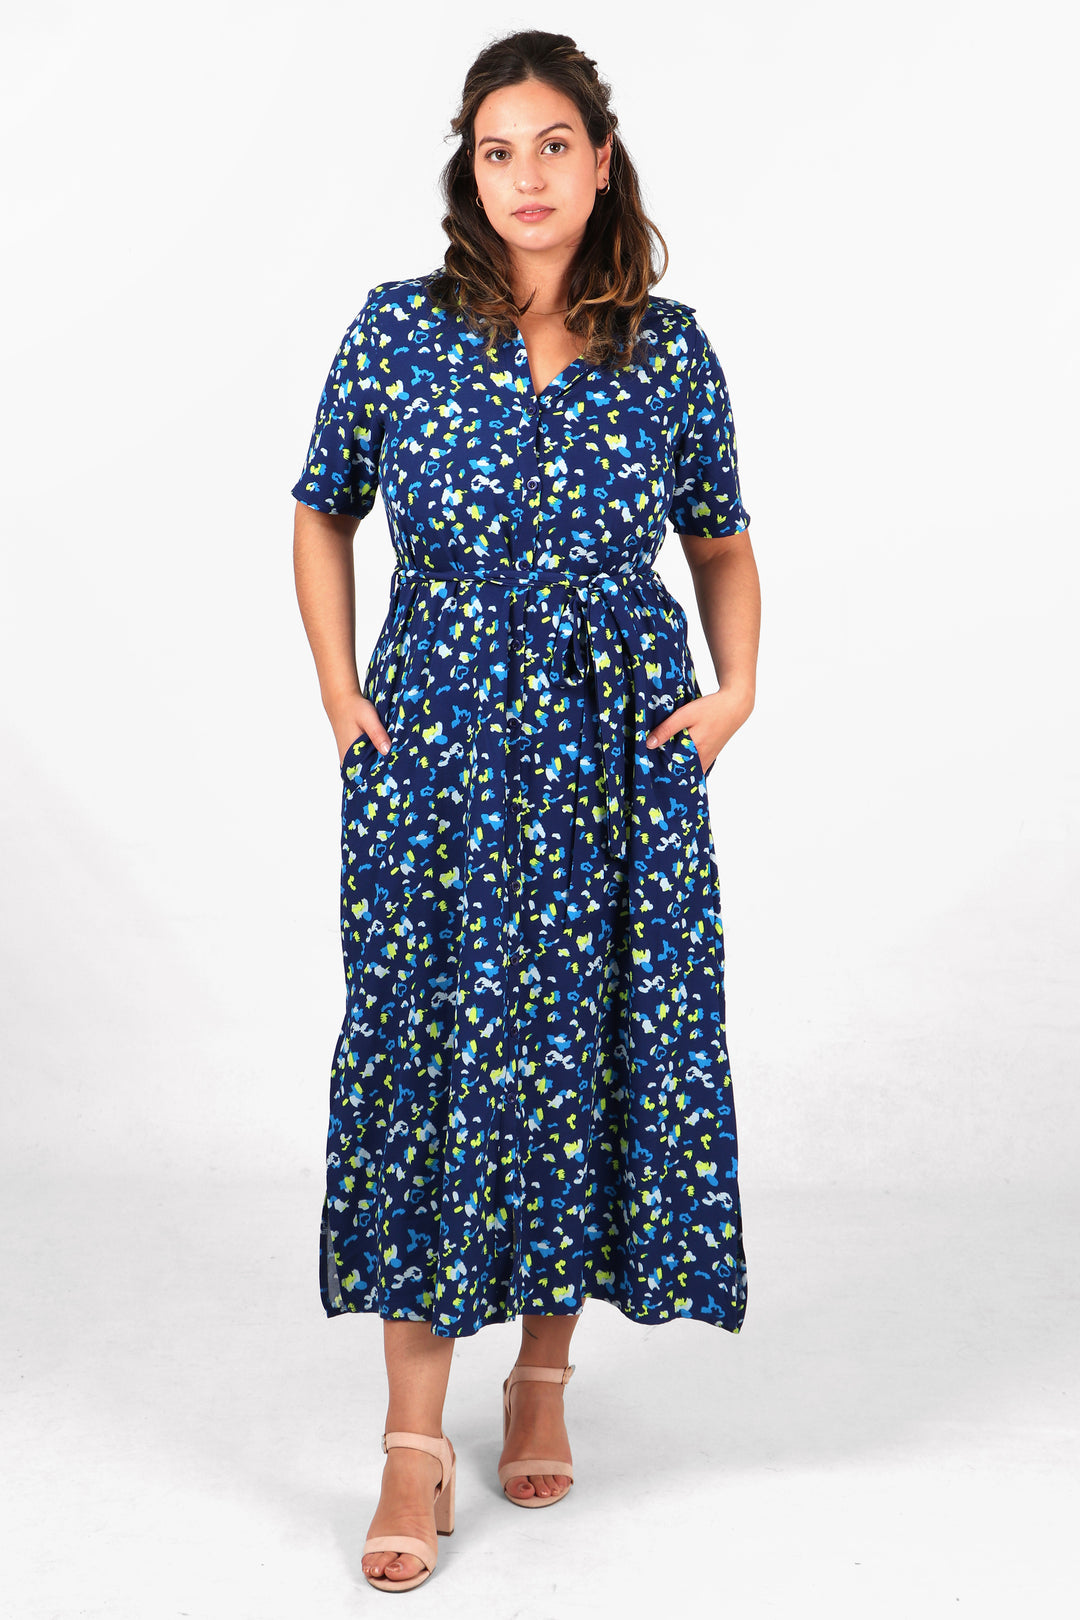 model wearing a midaxi length shirt dress with short sleeves, waist tie and an all over navy blue, yellow and white abstract print pattern